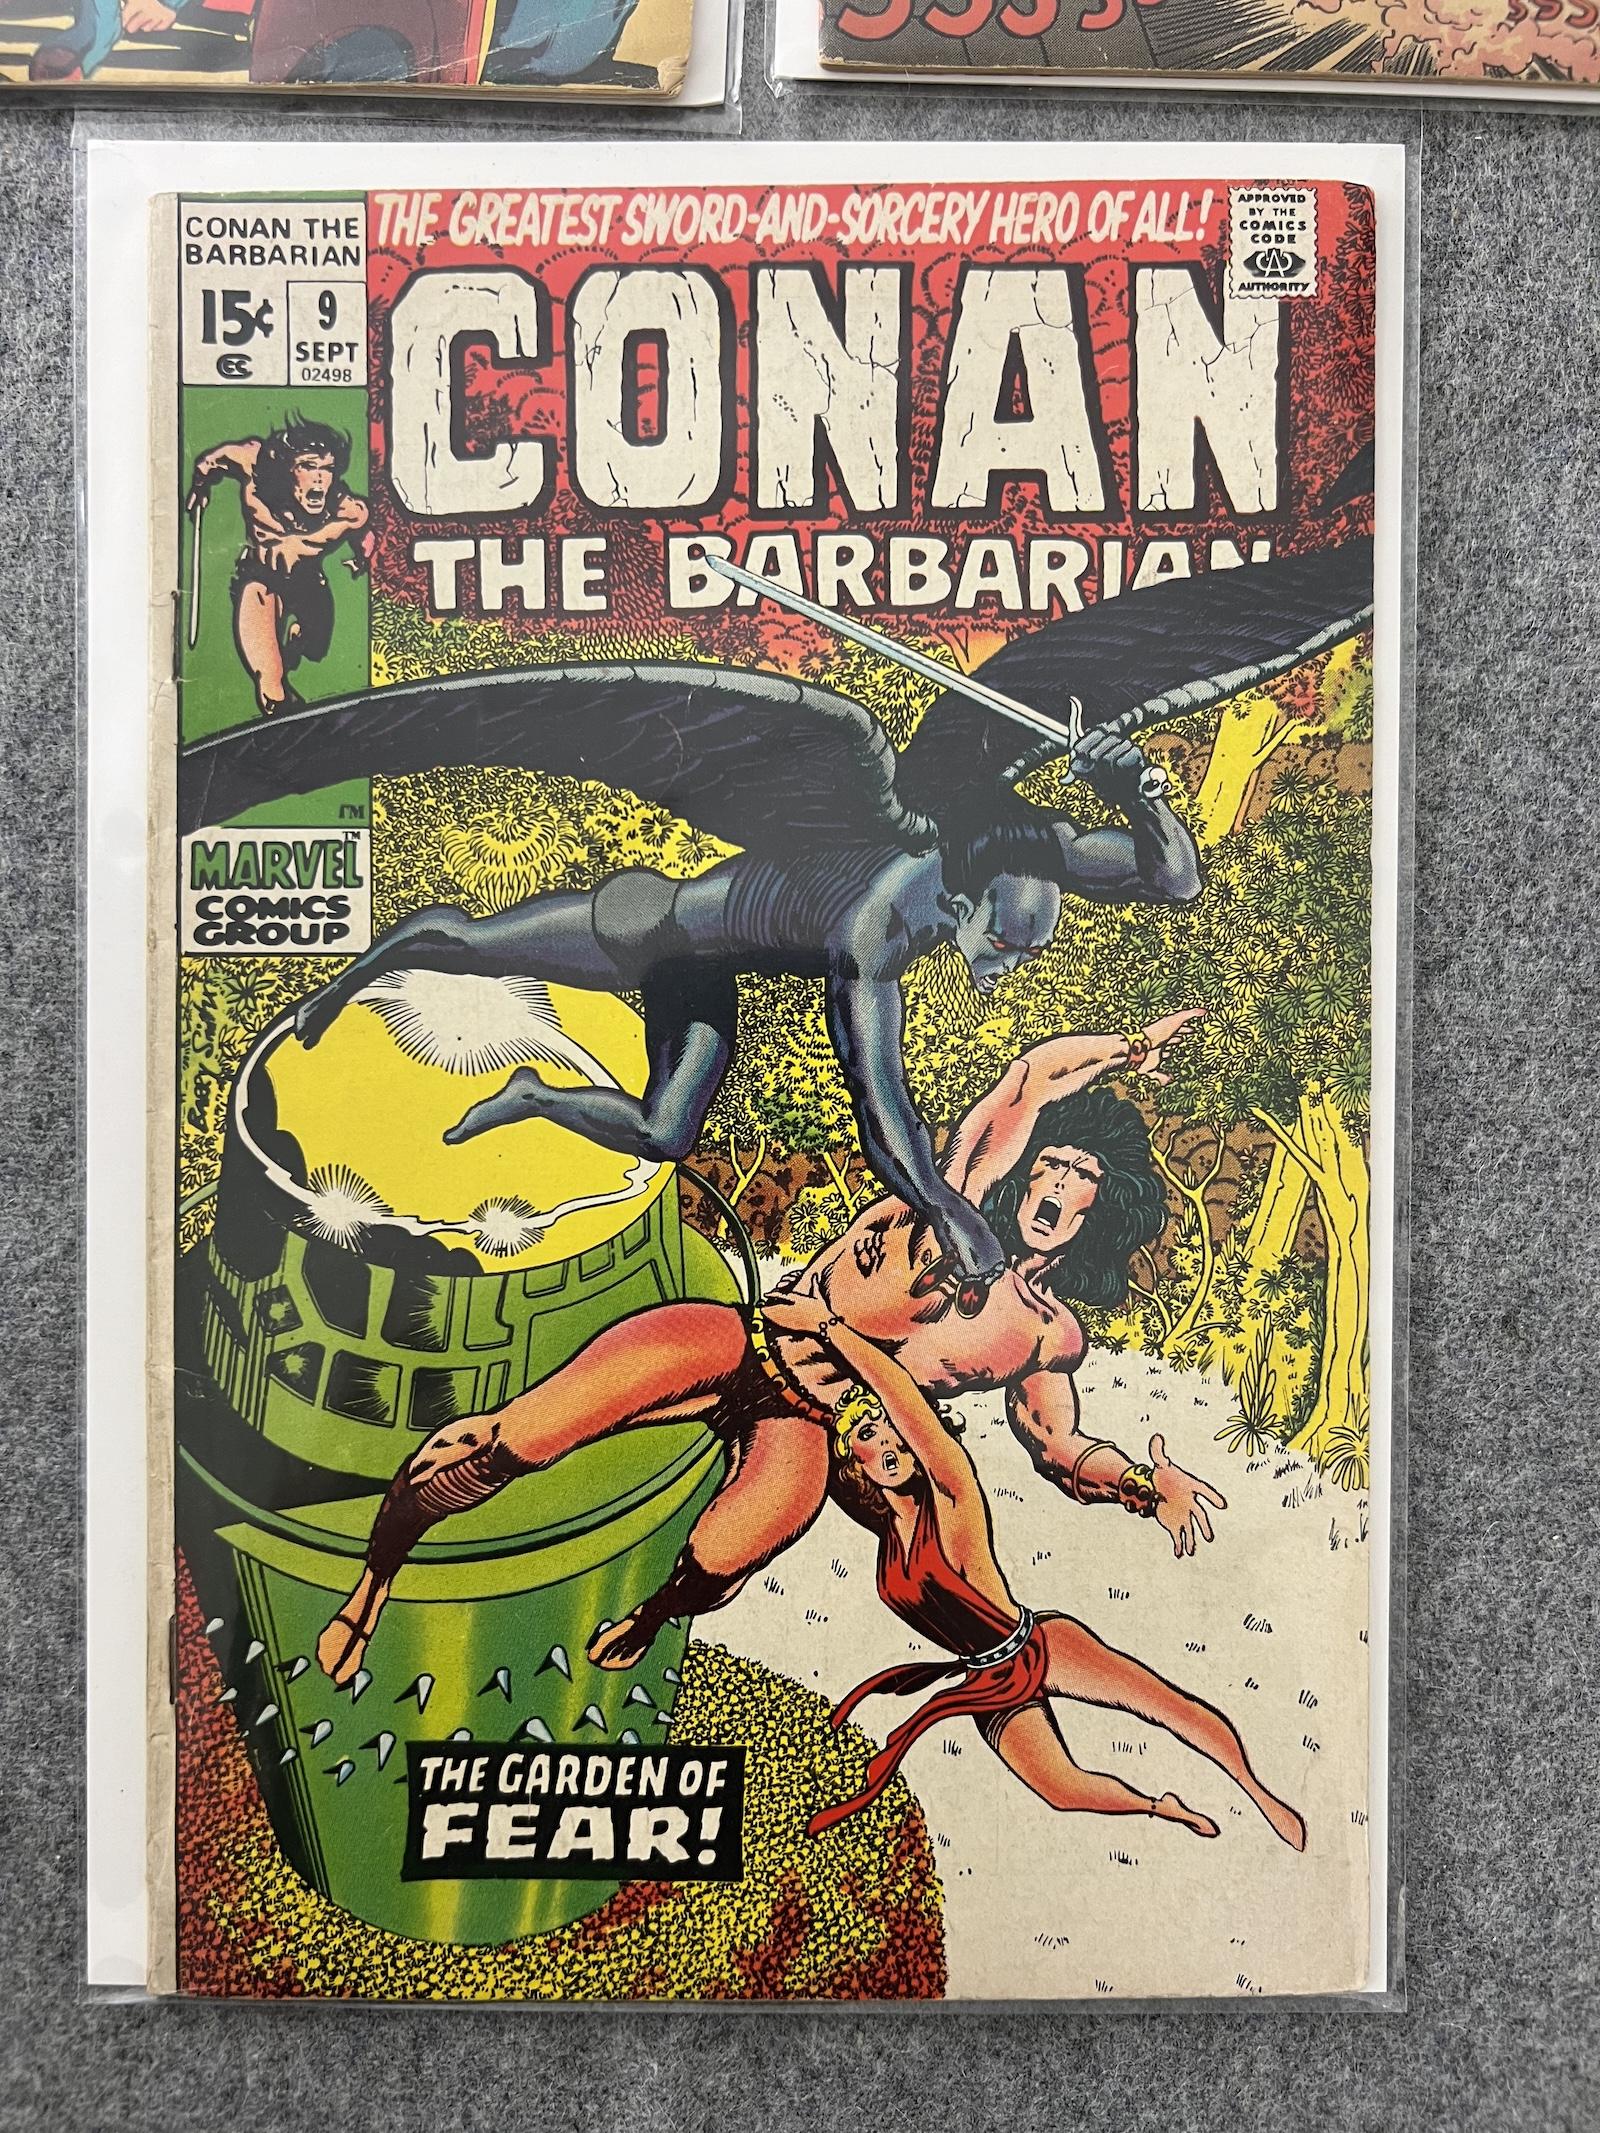 VINTAGE COMIC BOOK COLLECTION LOT Conan the barbarian 9 strange tales  Jimmy Olsen